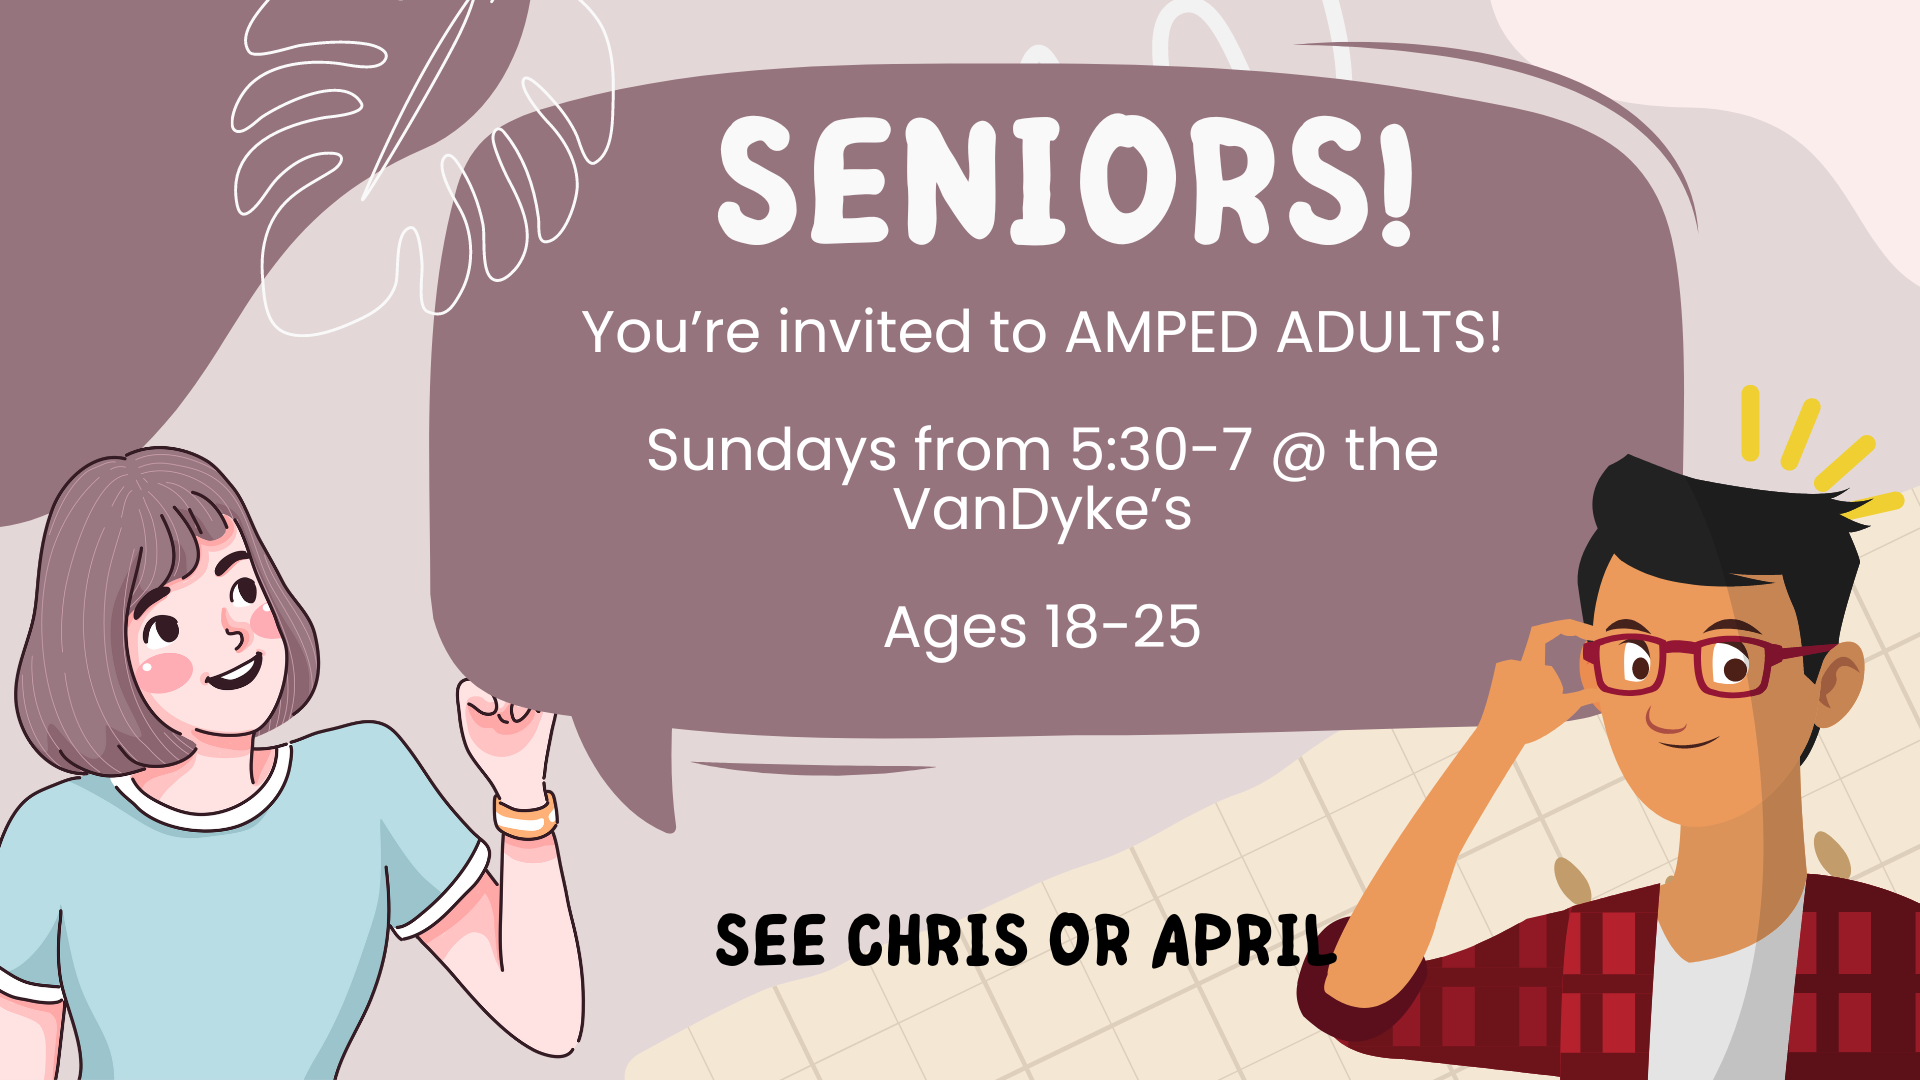 Seniors Amped Adults announcement